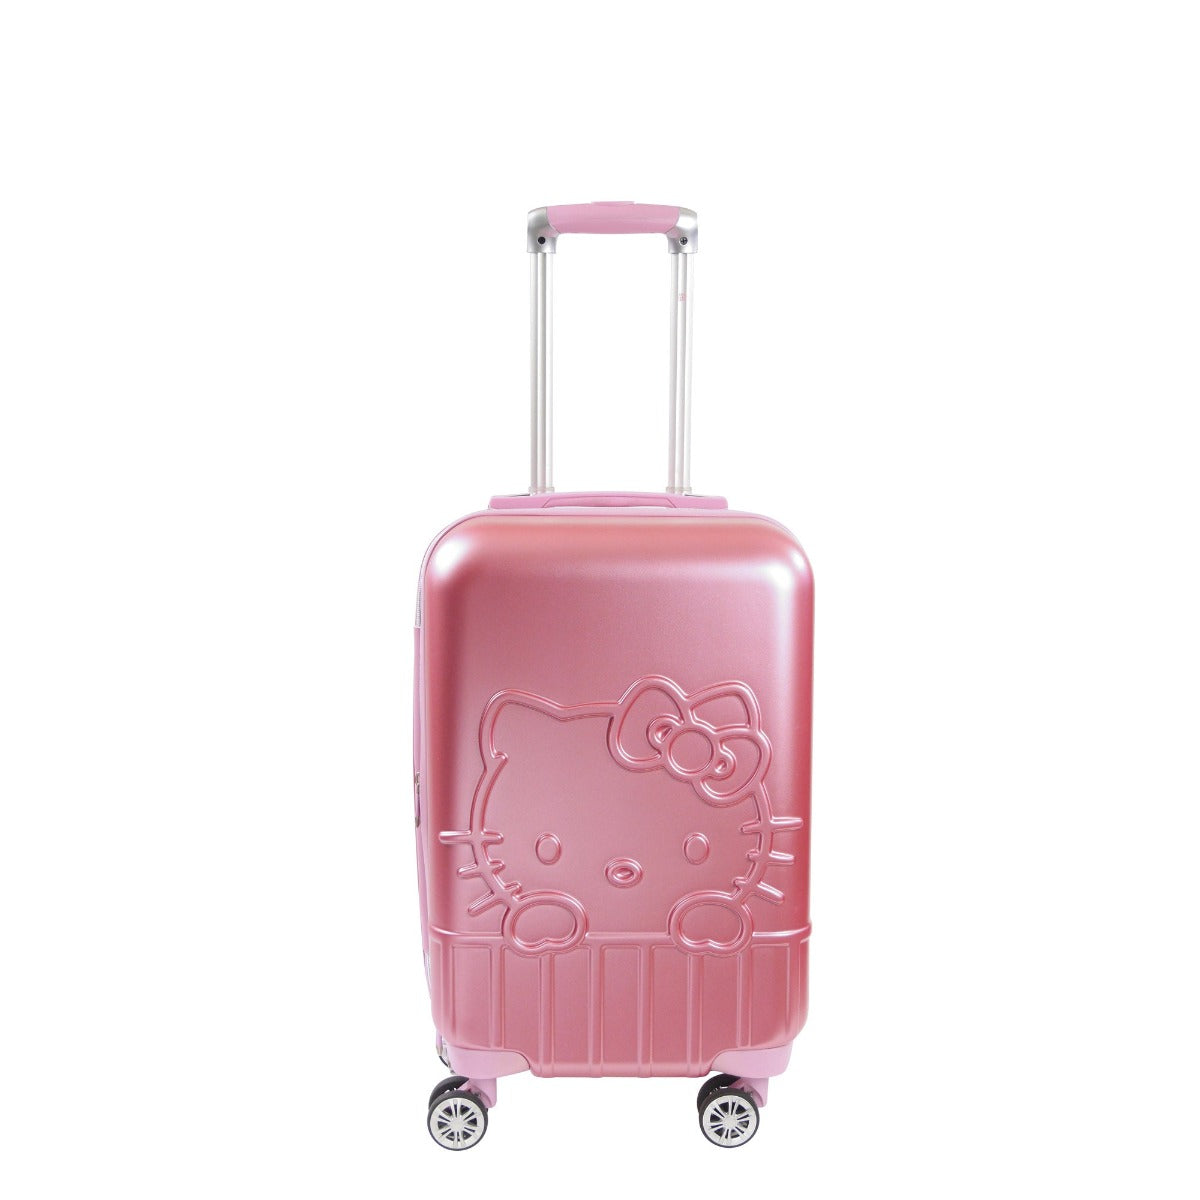 Travelling luggage bag- 2 in 1 - Pink